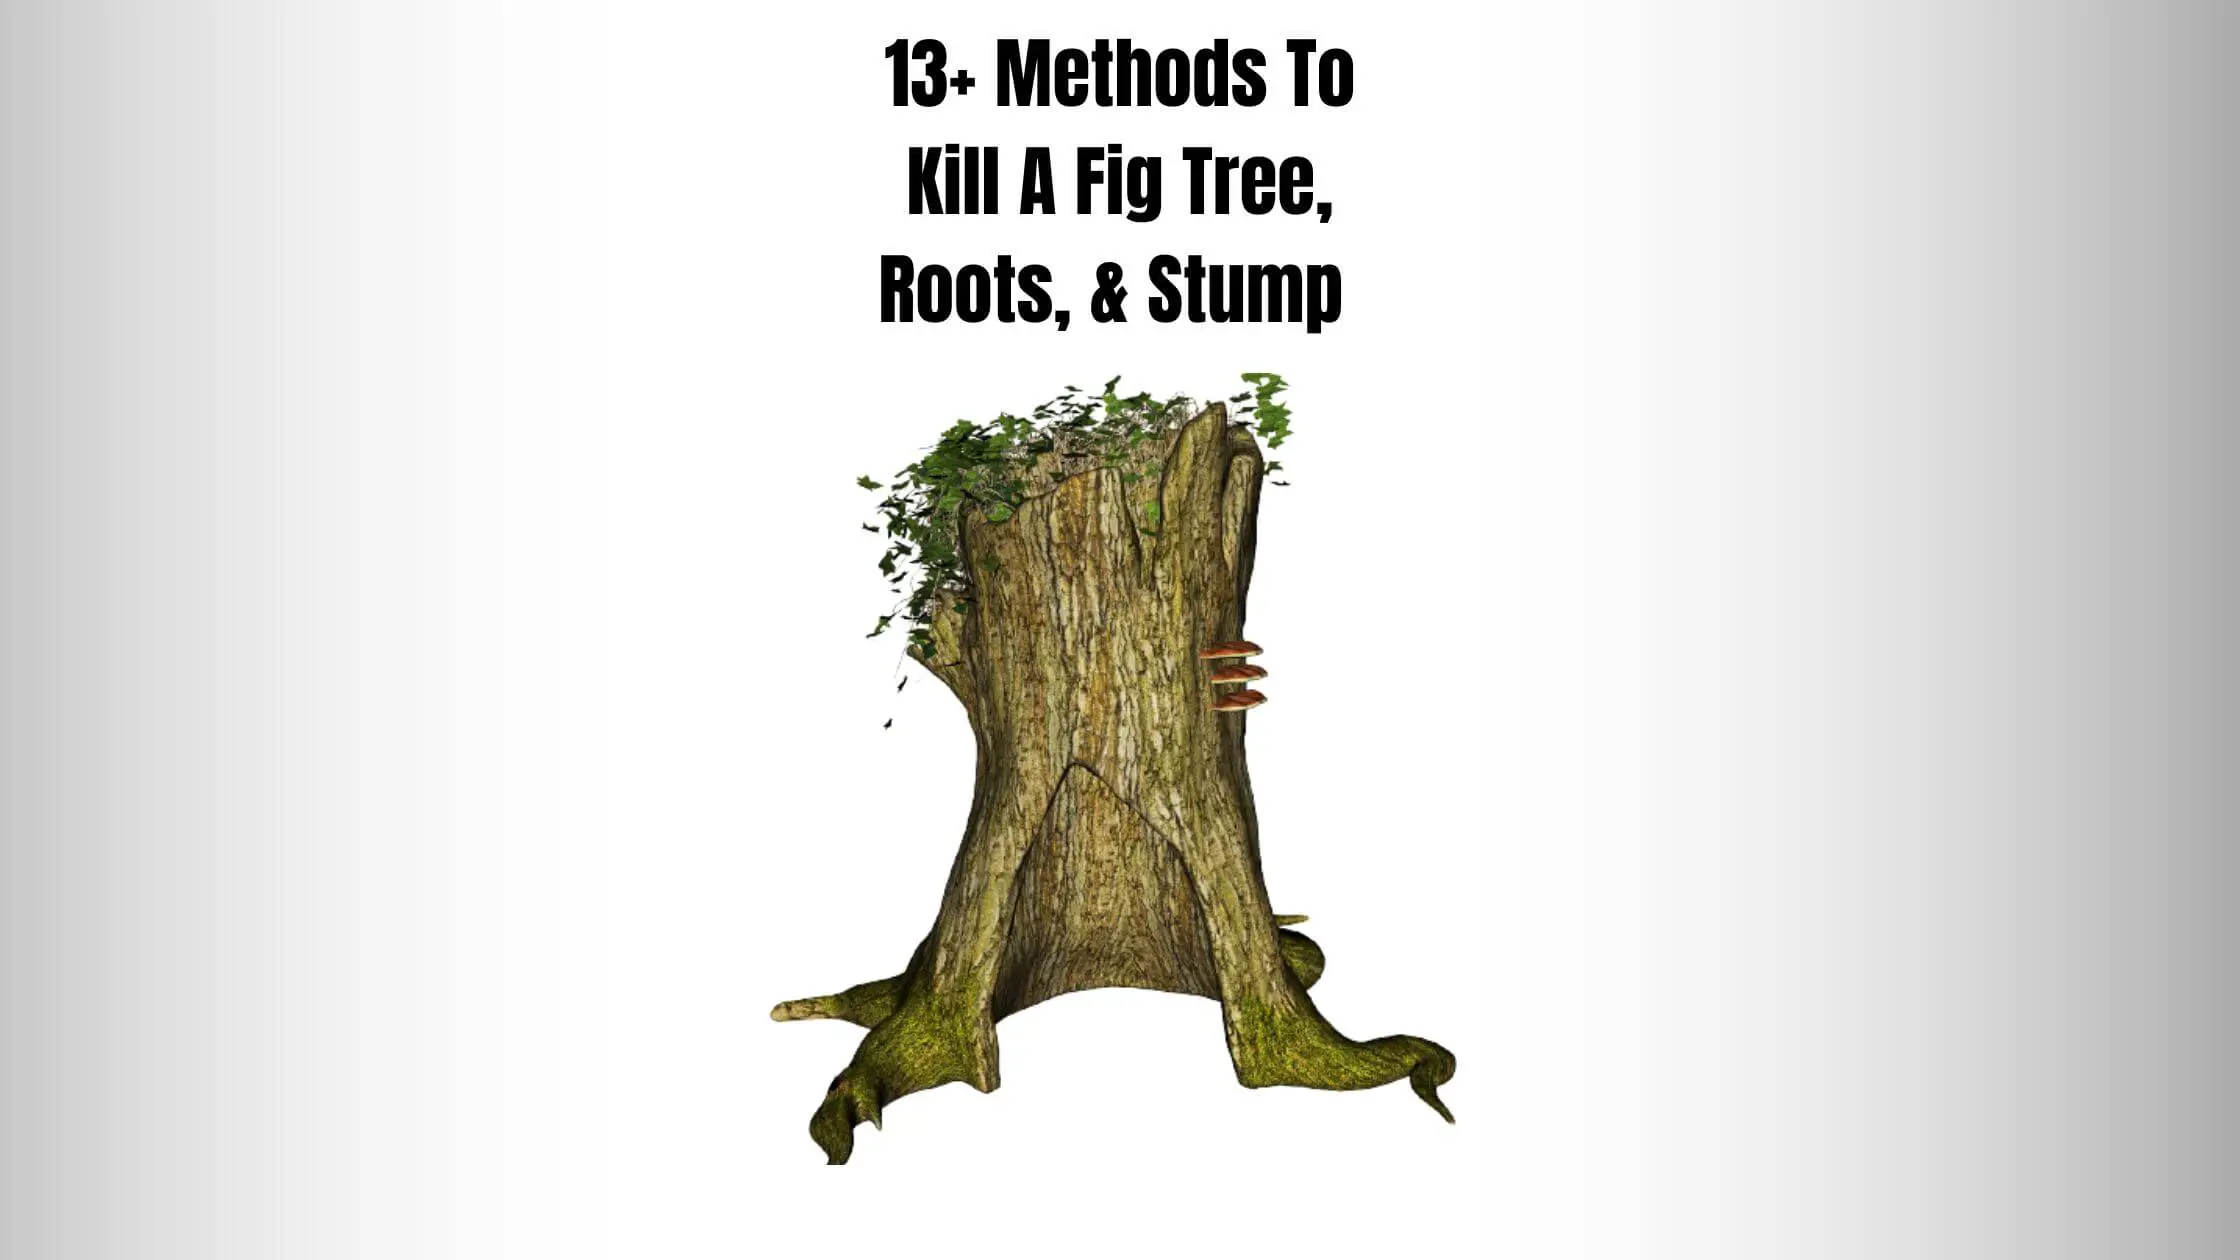 13+ Methods To Kill A Fig Tree, Roots, & Stump